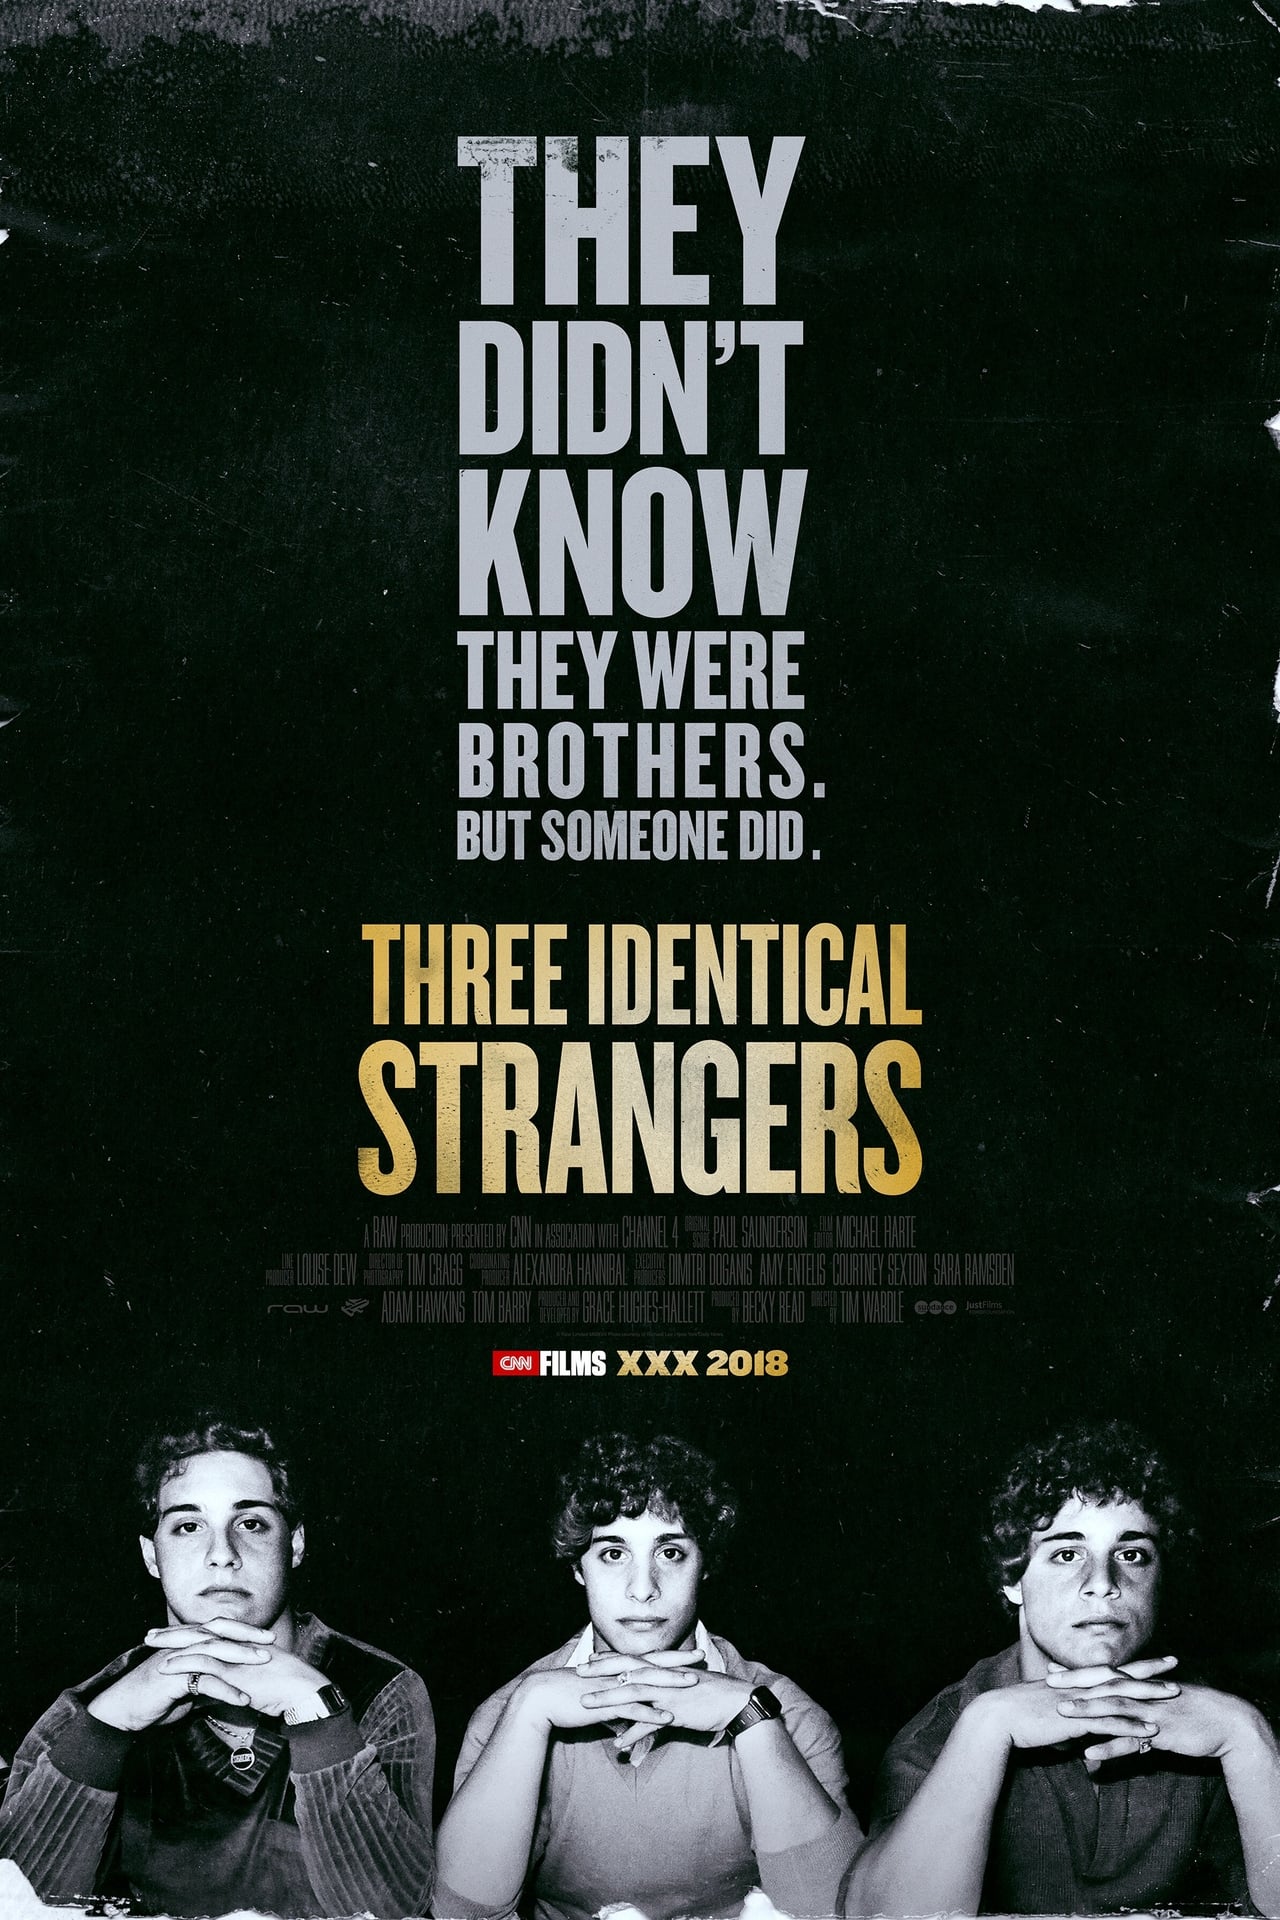 the-scandalous-story-behind-three-identical-strangers